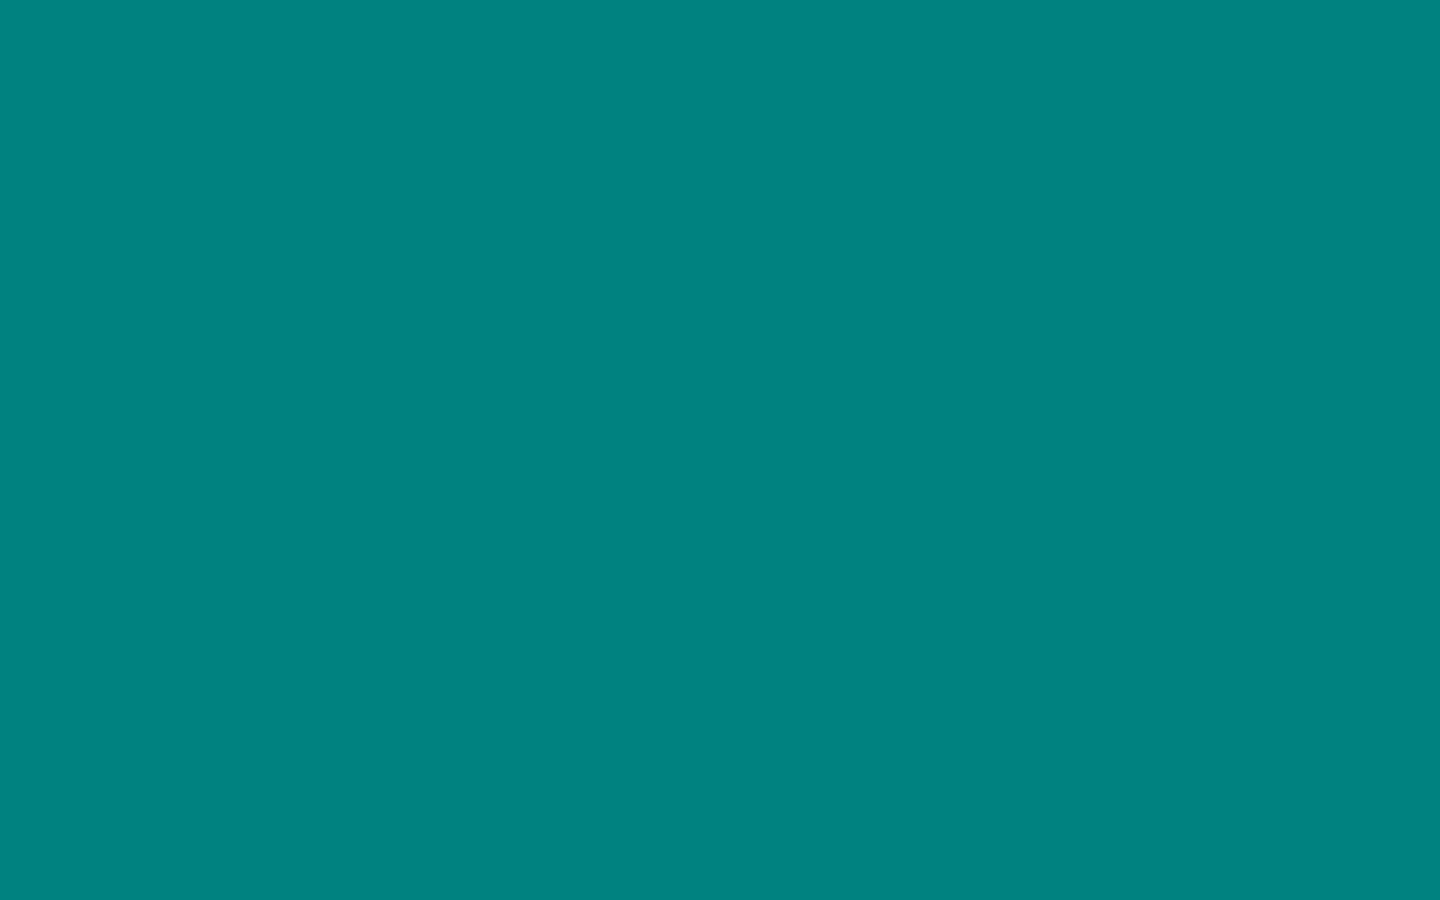 1440x900 Teal Green Solid Color Background